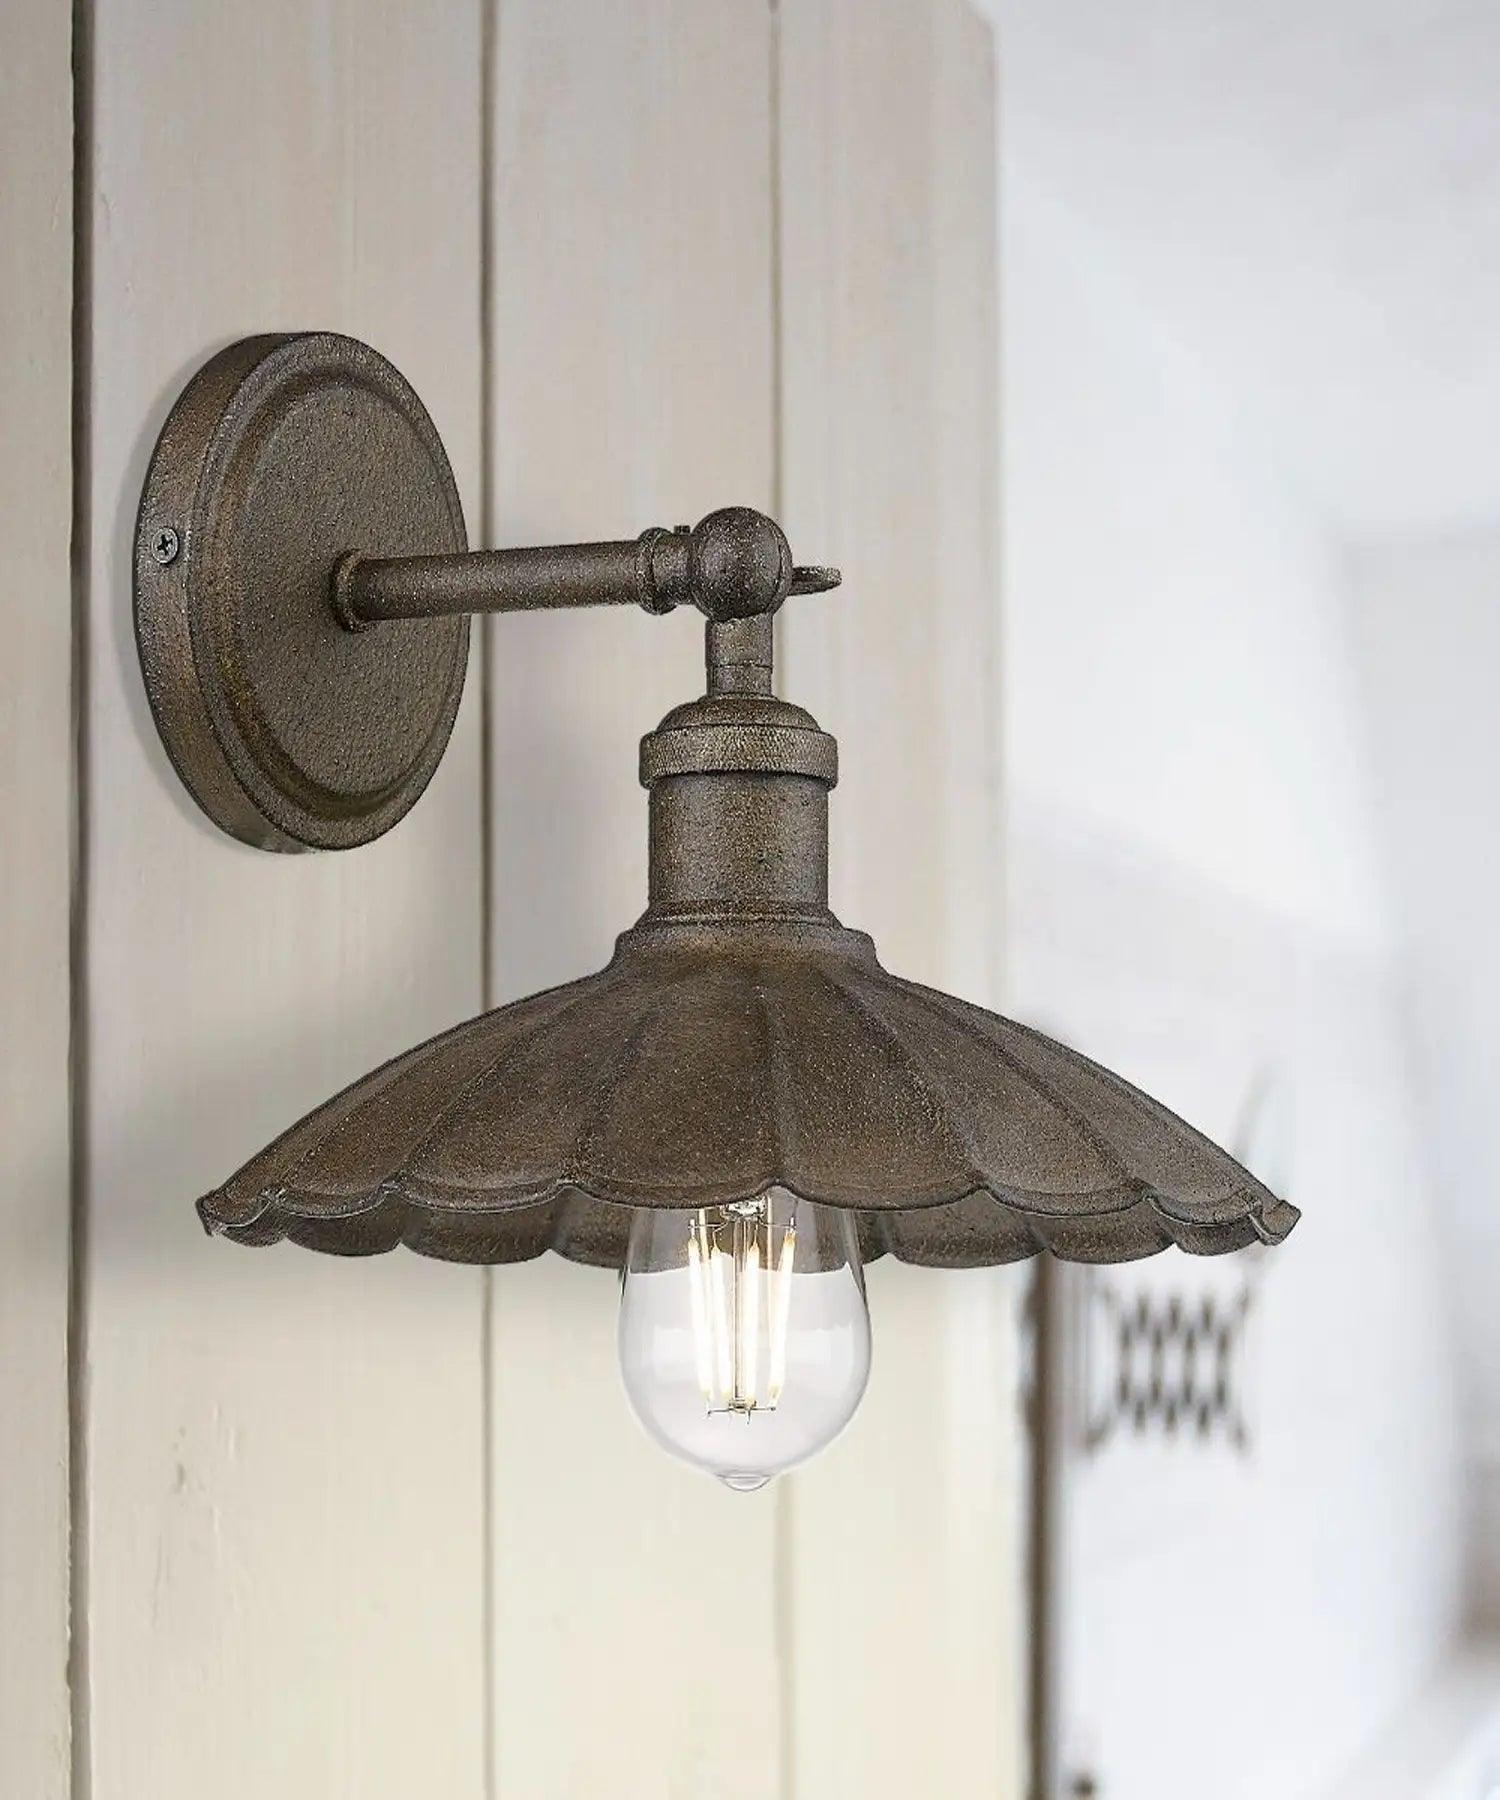 Rustic Sconces - Bees Lighting